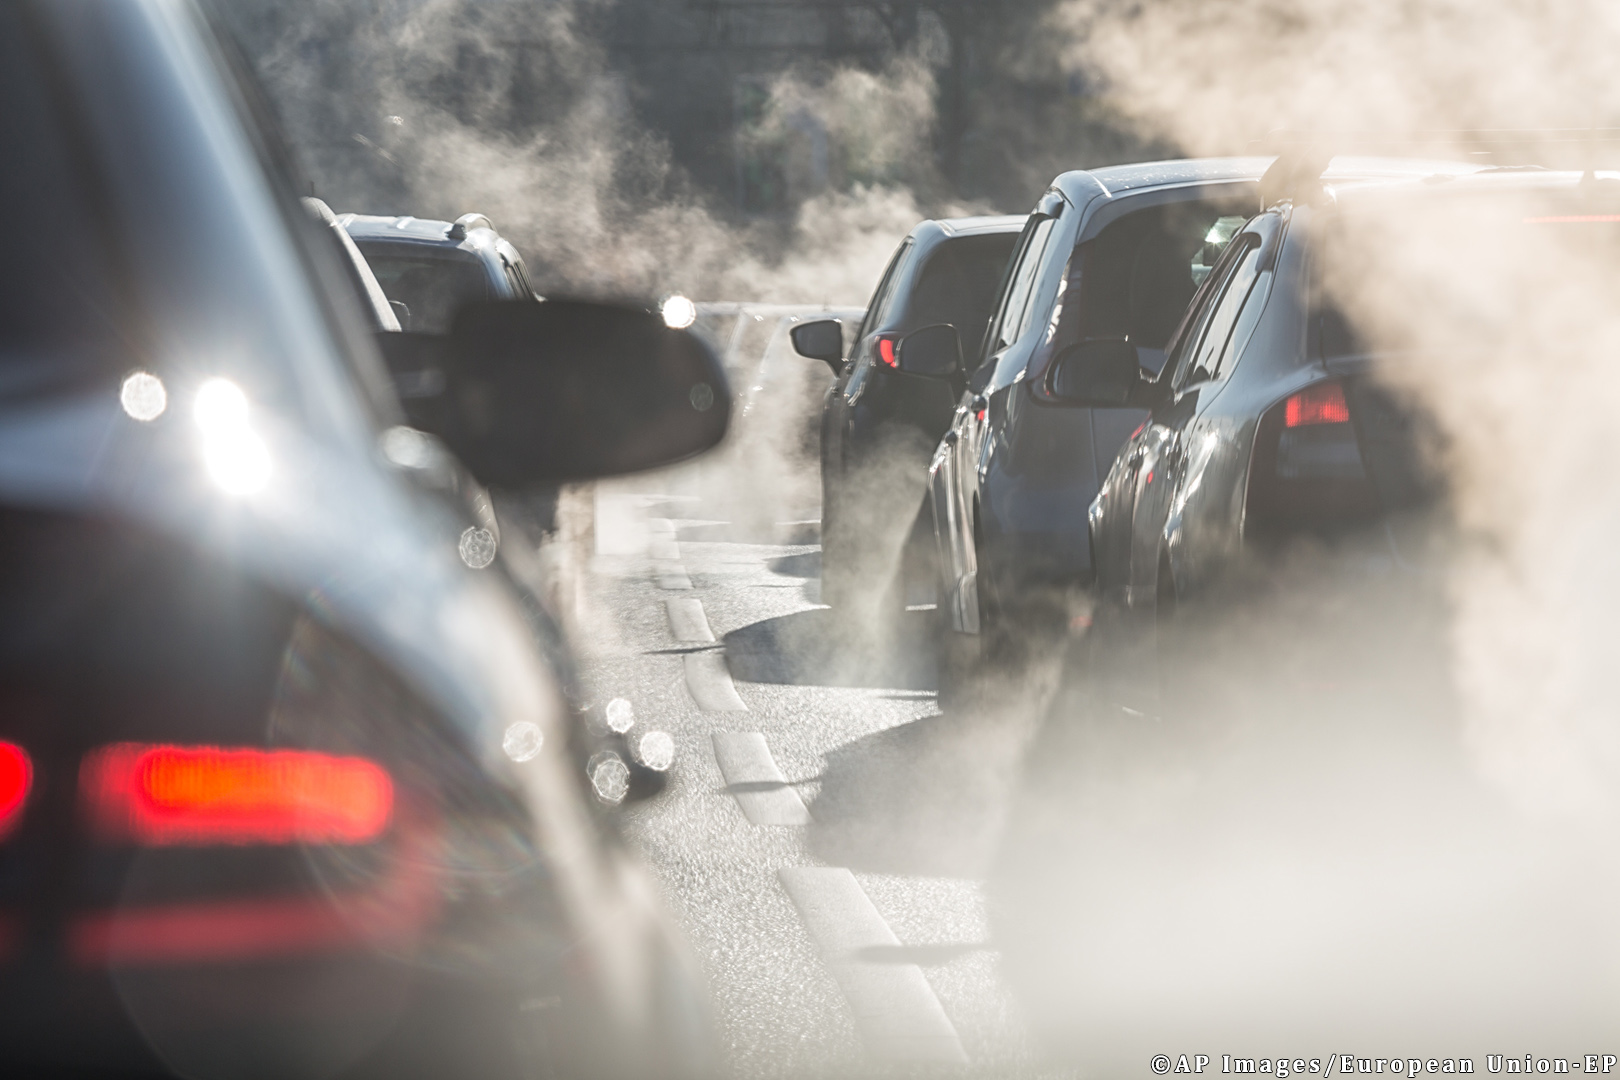 blurred-silhouettes-of-cars-surrounded-by-steam-from-the-exhaust